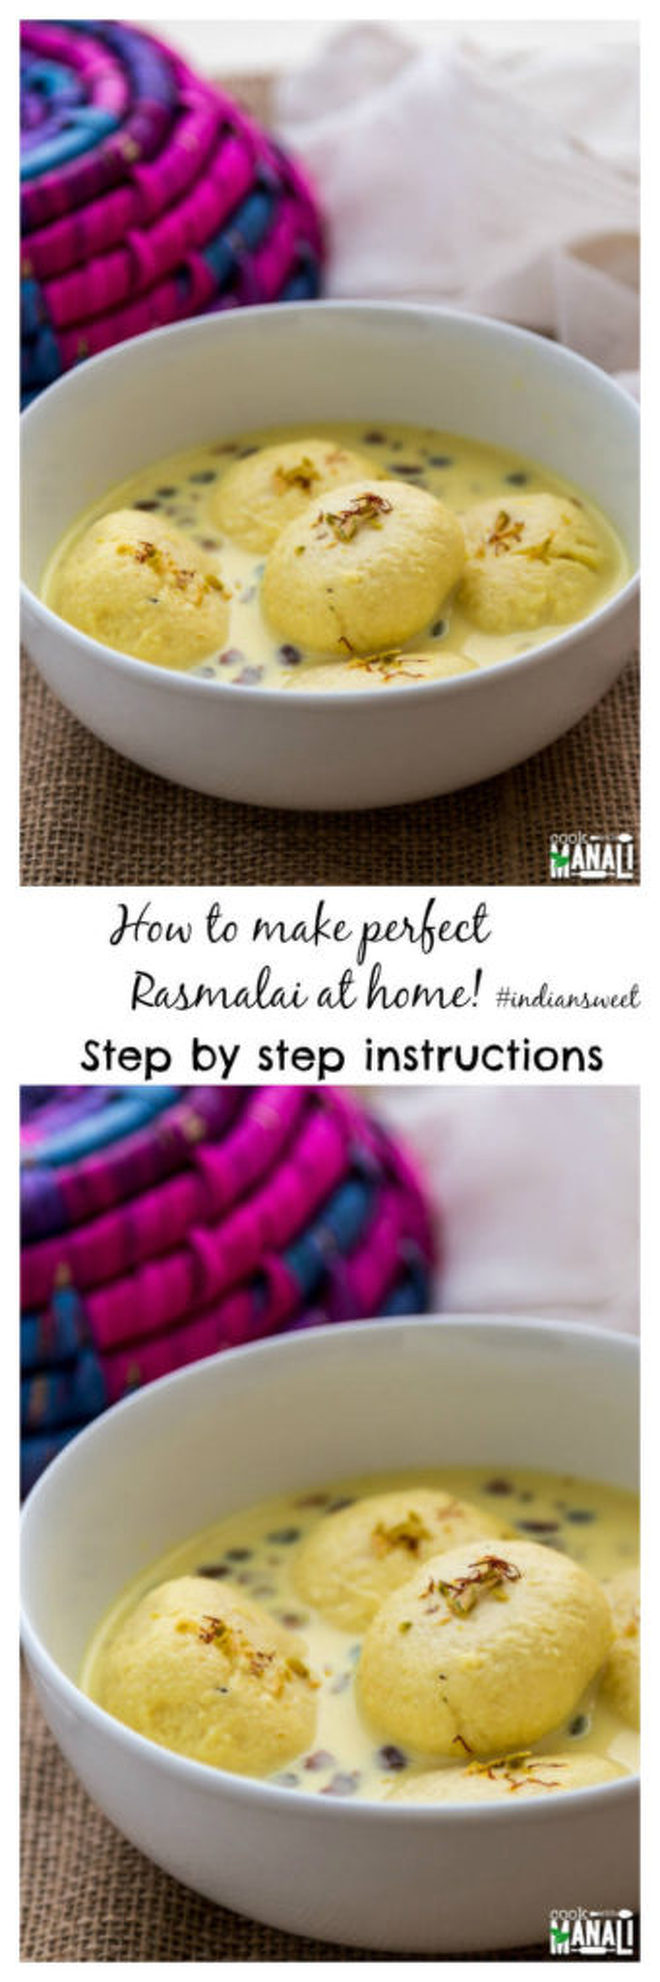 How To Make Soft Rasmalai At Home Cook With Manali 